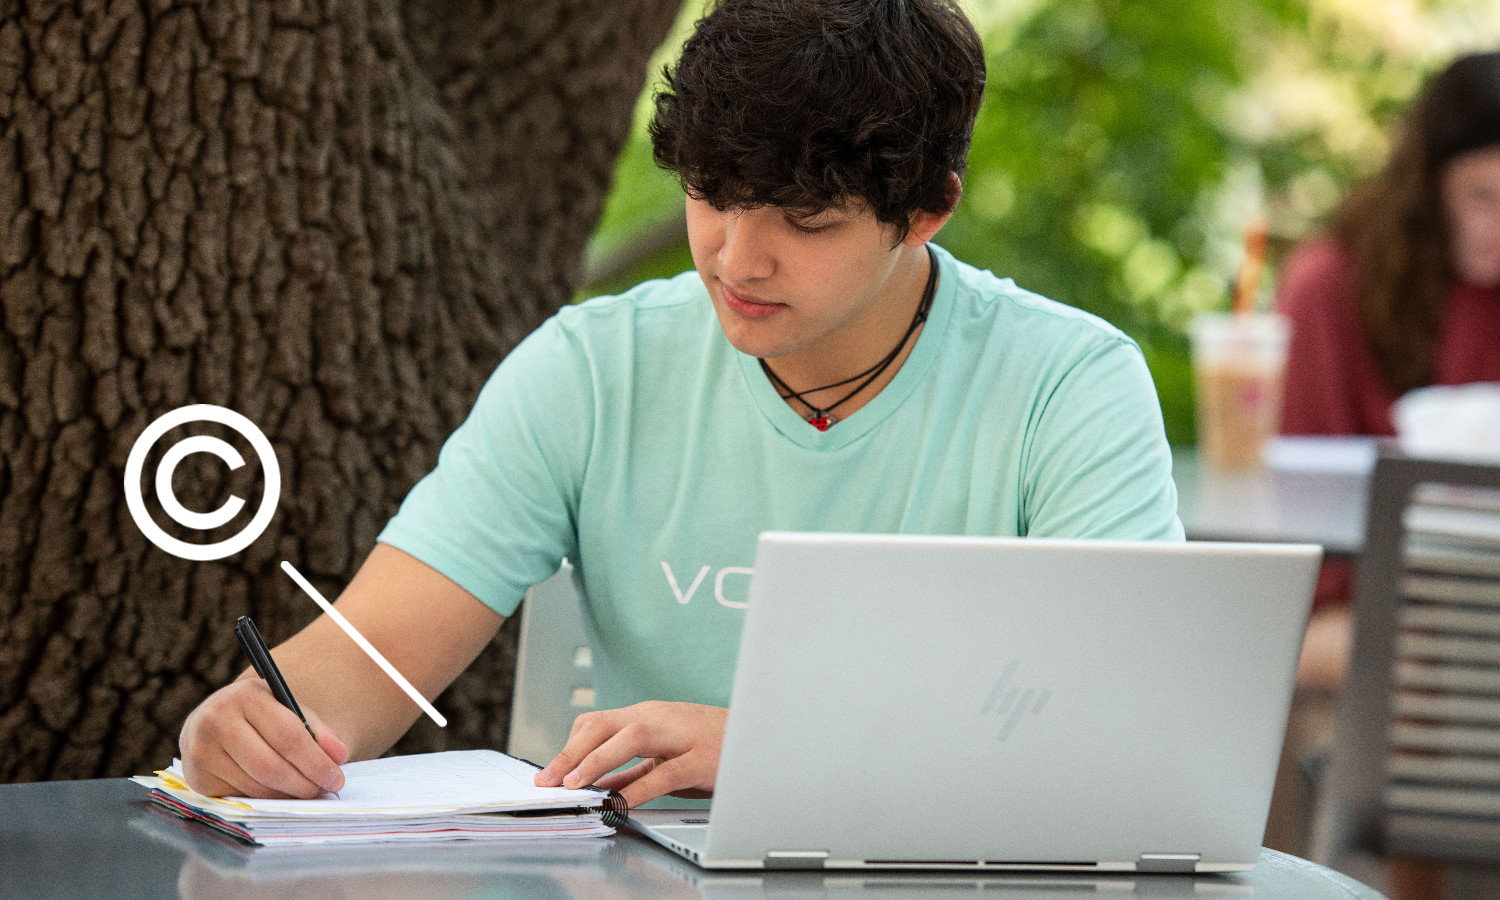 copyright symbol in photo of student working on laptop